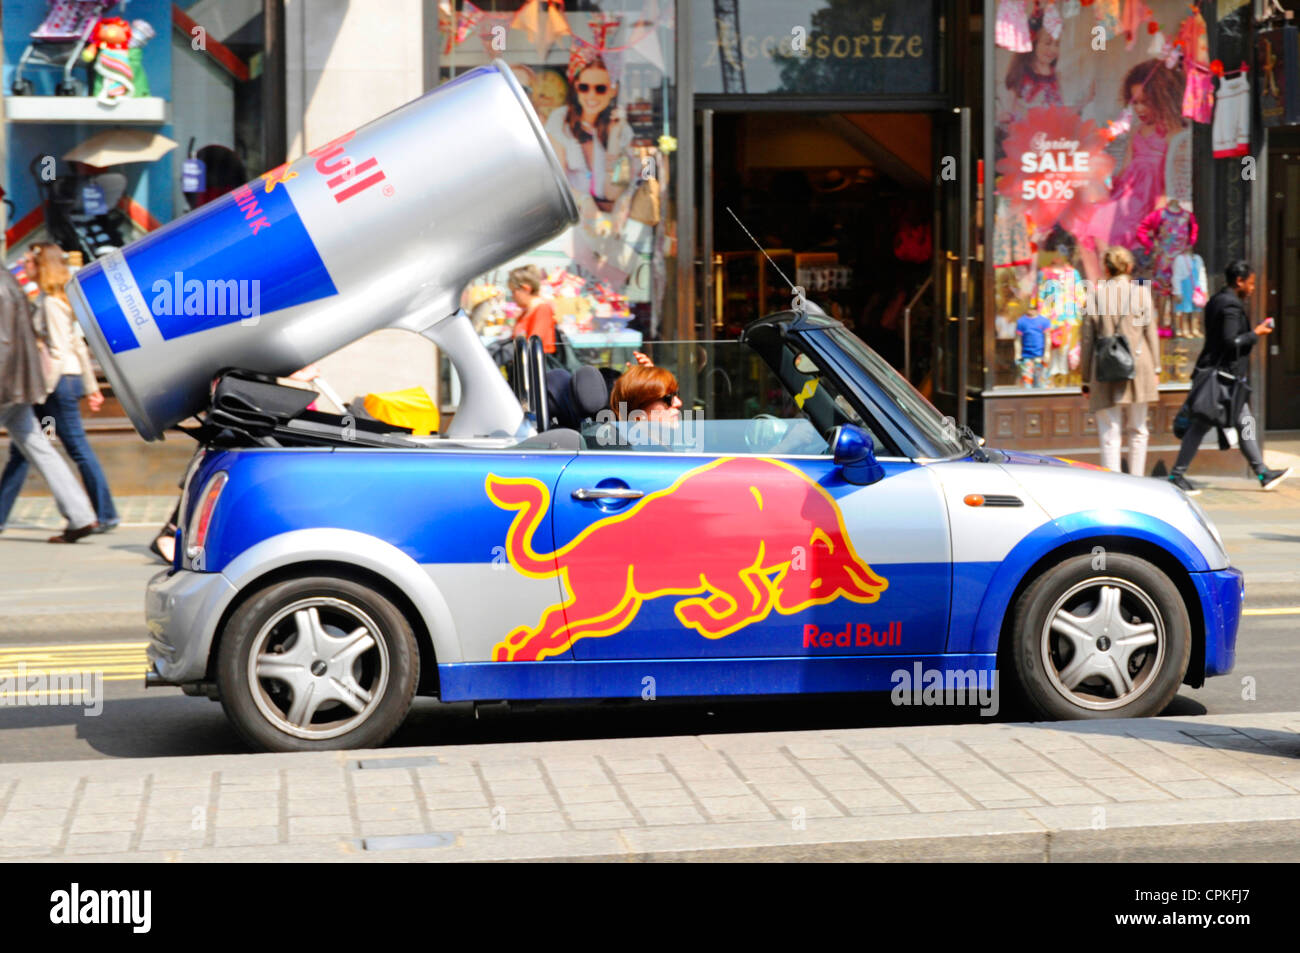 Mini convertible car converted to promote Red Bull drink by incorporating large can Stock Photo